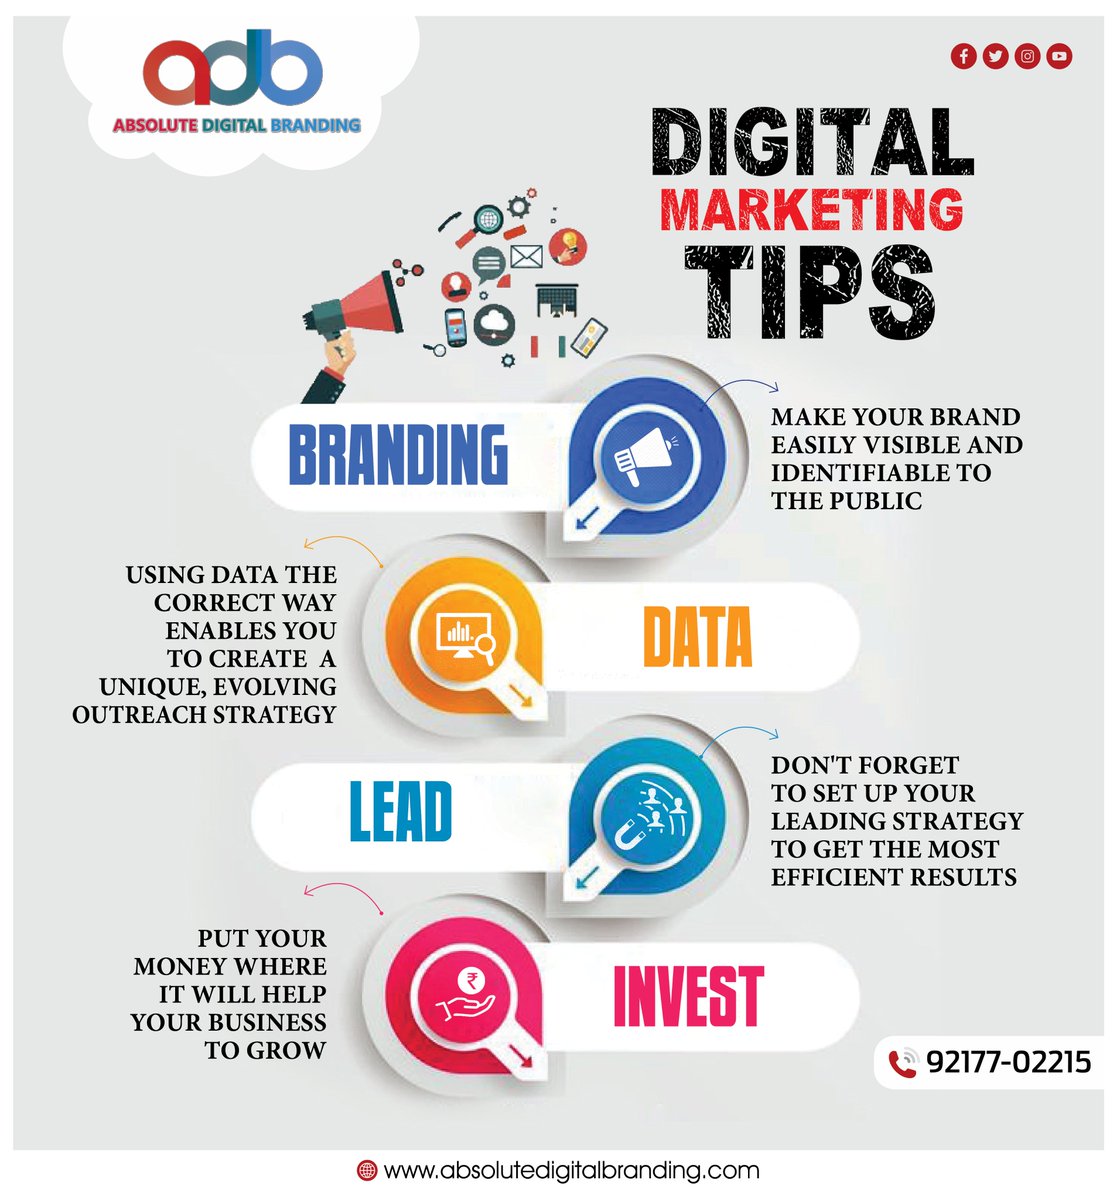 Businesses leverage digital channels such as search engines, social media, email, and other websites to connect with current and prospective customers.
by Absolutedigitalbranding.com
#Marktingstrategy #SEObrandingagency #SEO #PPC #SMO #SMM #SeoCompany #digitalmarketingcompany #Social